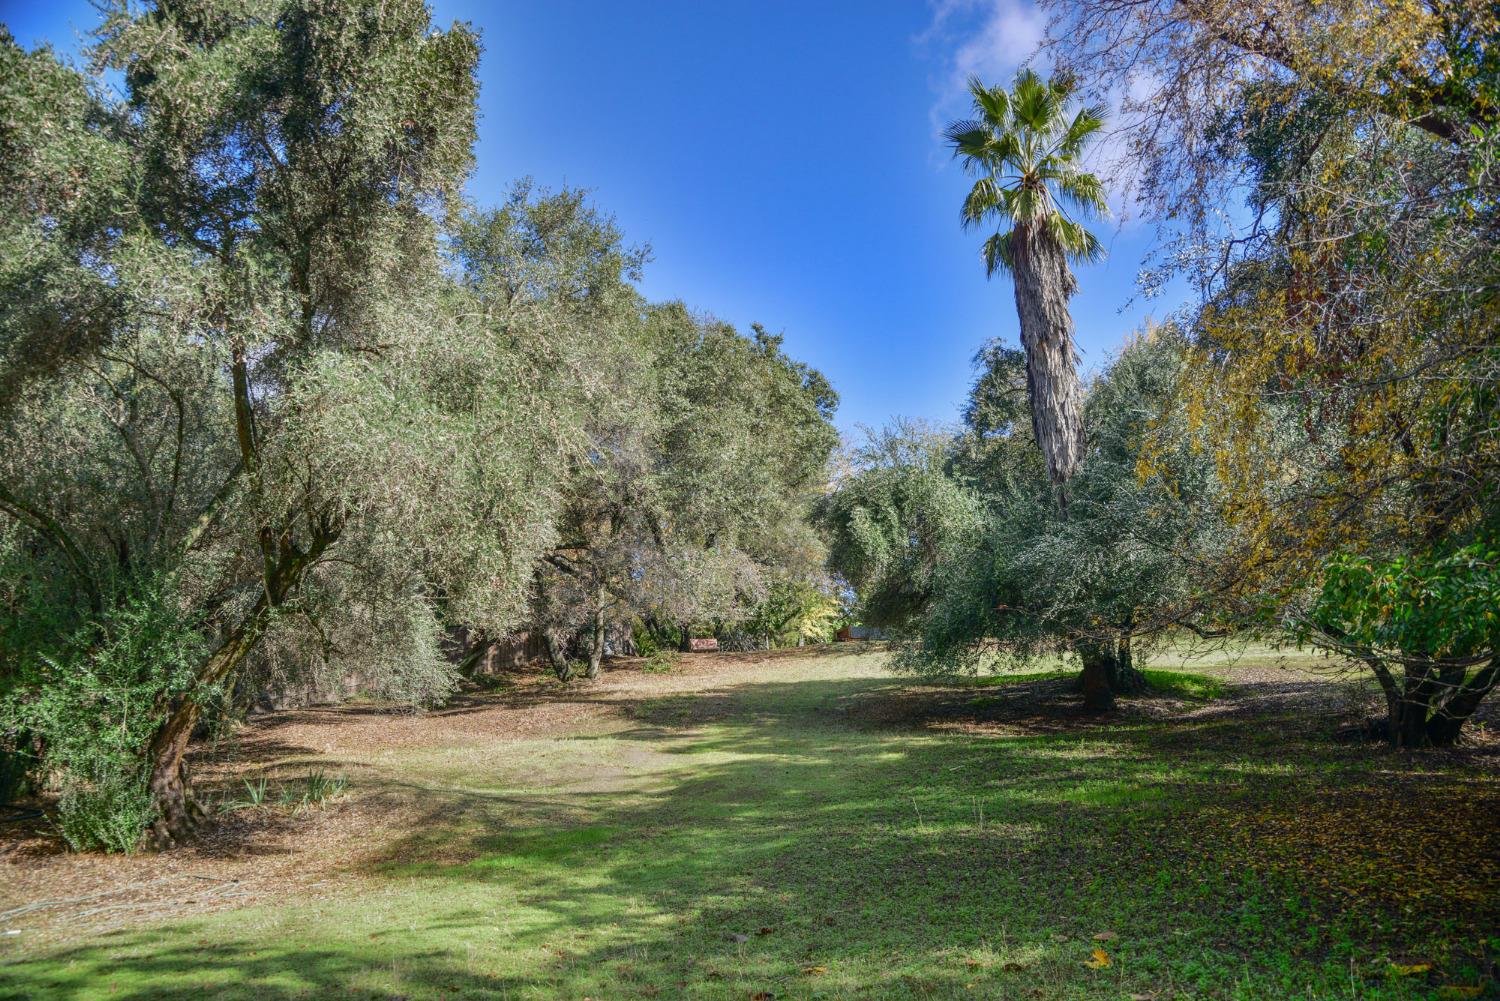 Here's your opportunity to own one of the last remaining residential lots right by the American River Trail access! This buildable site has a possible building pad (after set backs) of approximately 4,480 square feet! You'll appreciate the mature trees, privacy, location and life style of old Fair Oaks by the river! Come build your dream home today!